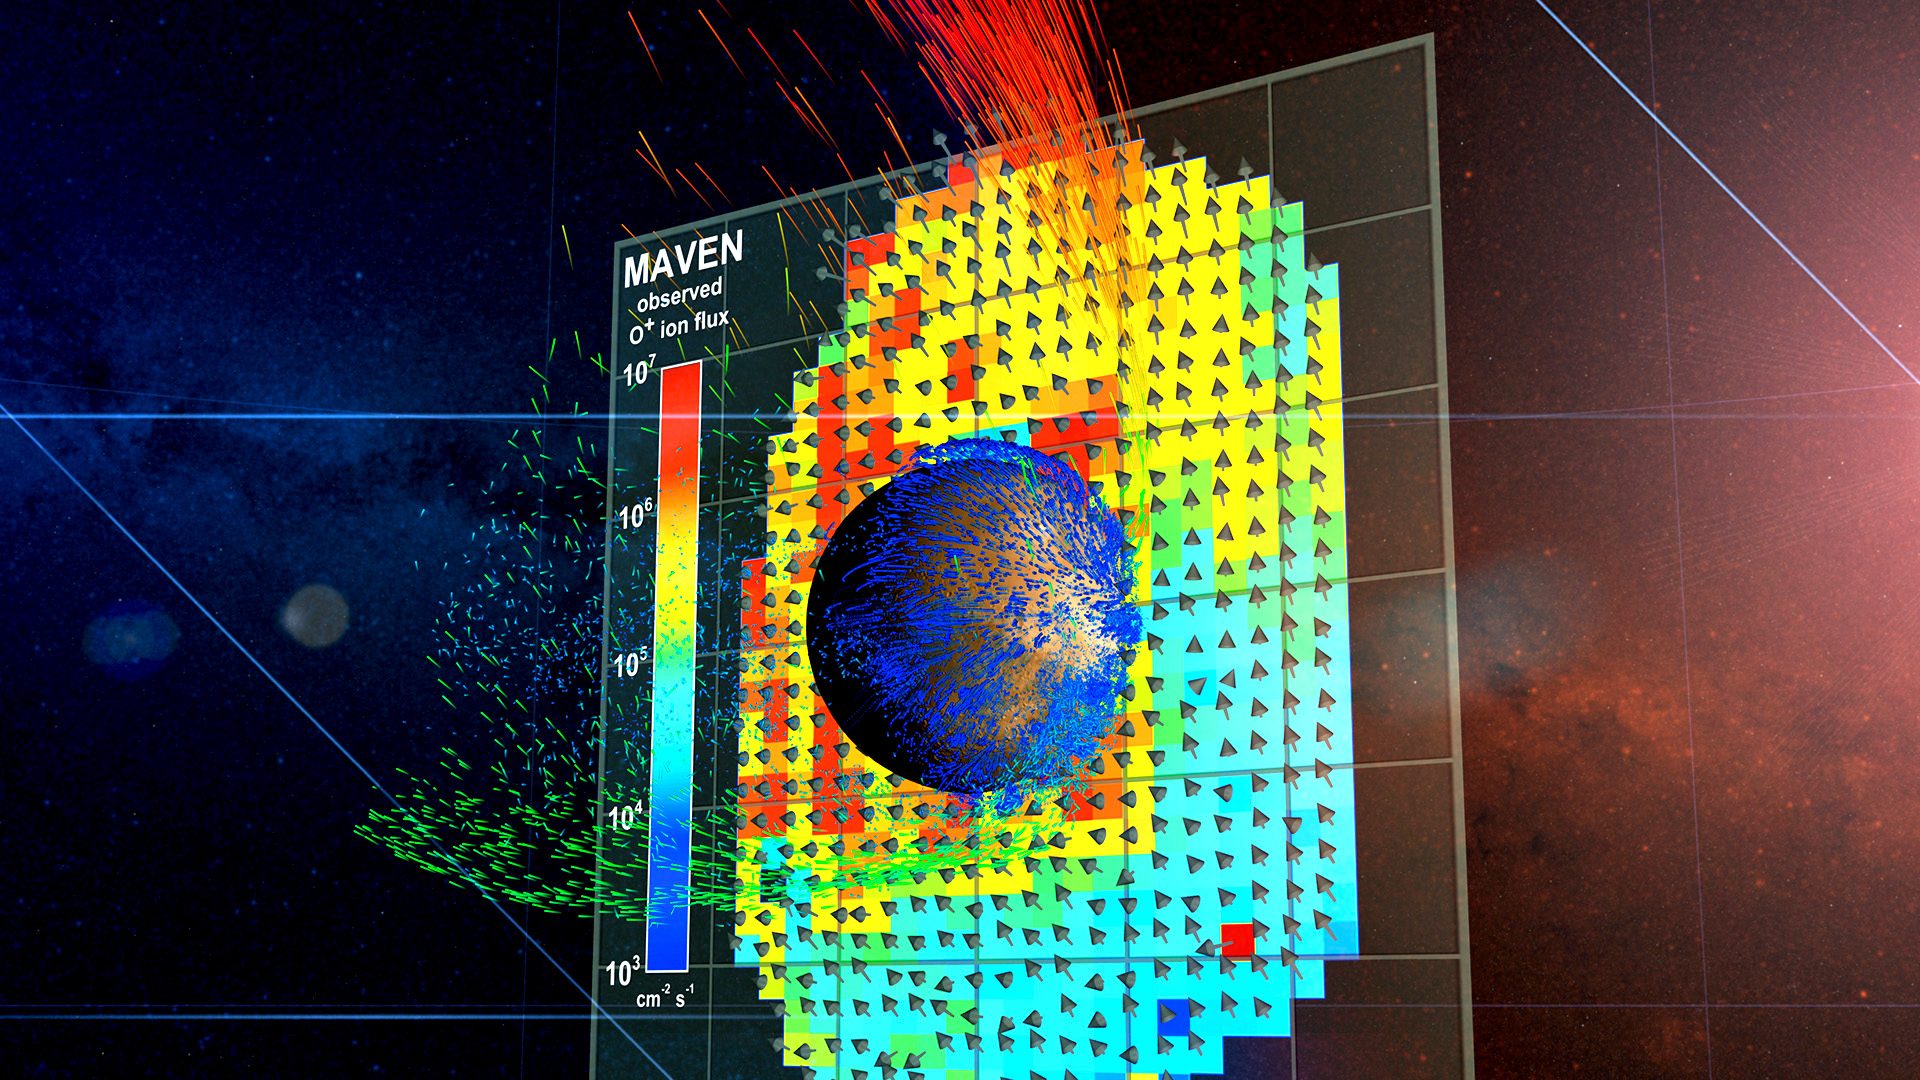 Scientists have long suspected the solar wind of stripping the Martian upper atmosphere into space, turning Mars from a blue world to a red one. Now, NASA's MAVEN orbiter is observing this process in action, providing significant data on solar wind erosion at Mars.Watch this video on the NASA Goddard YouTube channel.Complete transcript available.This video is also available on our YouTube channel.